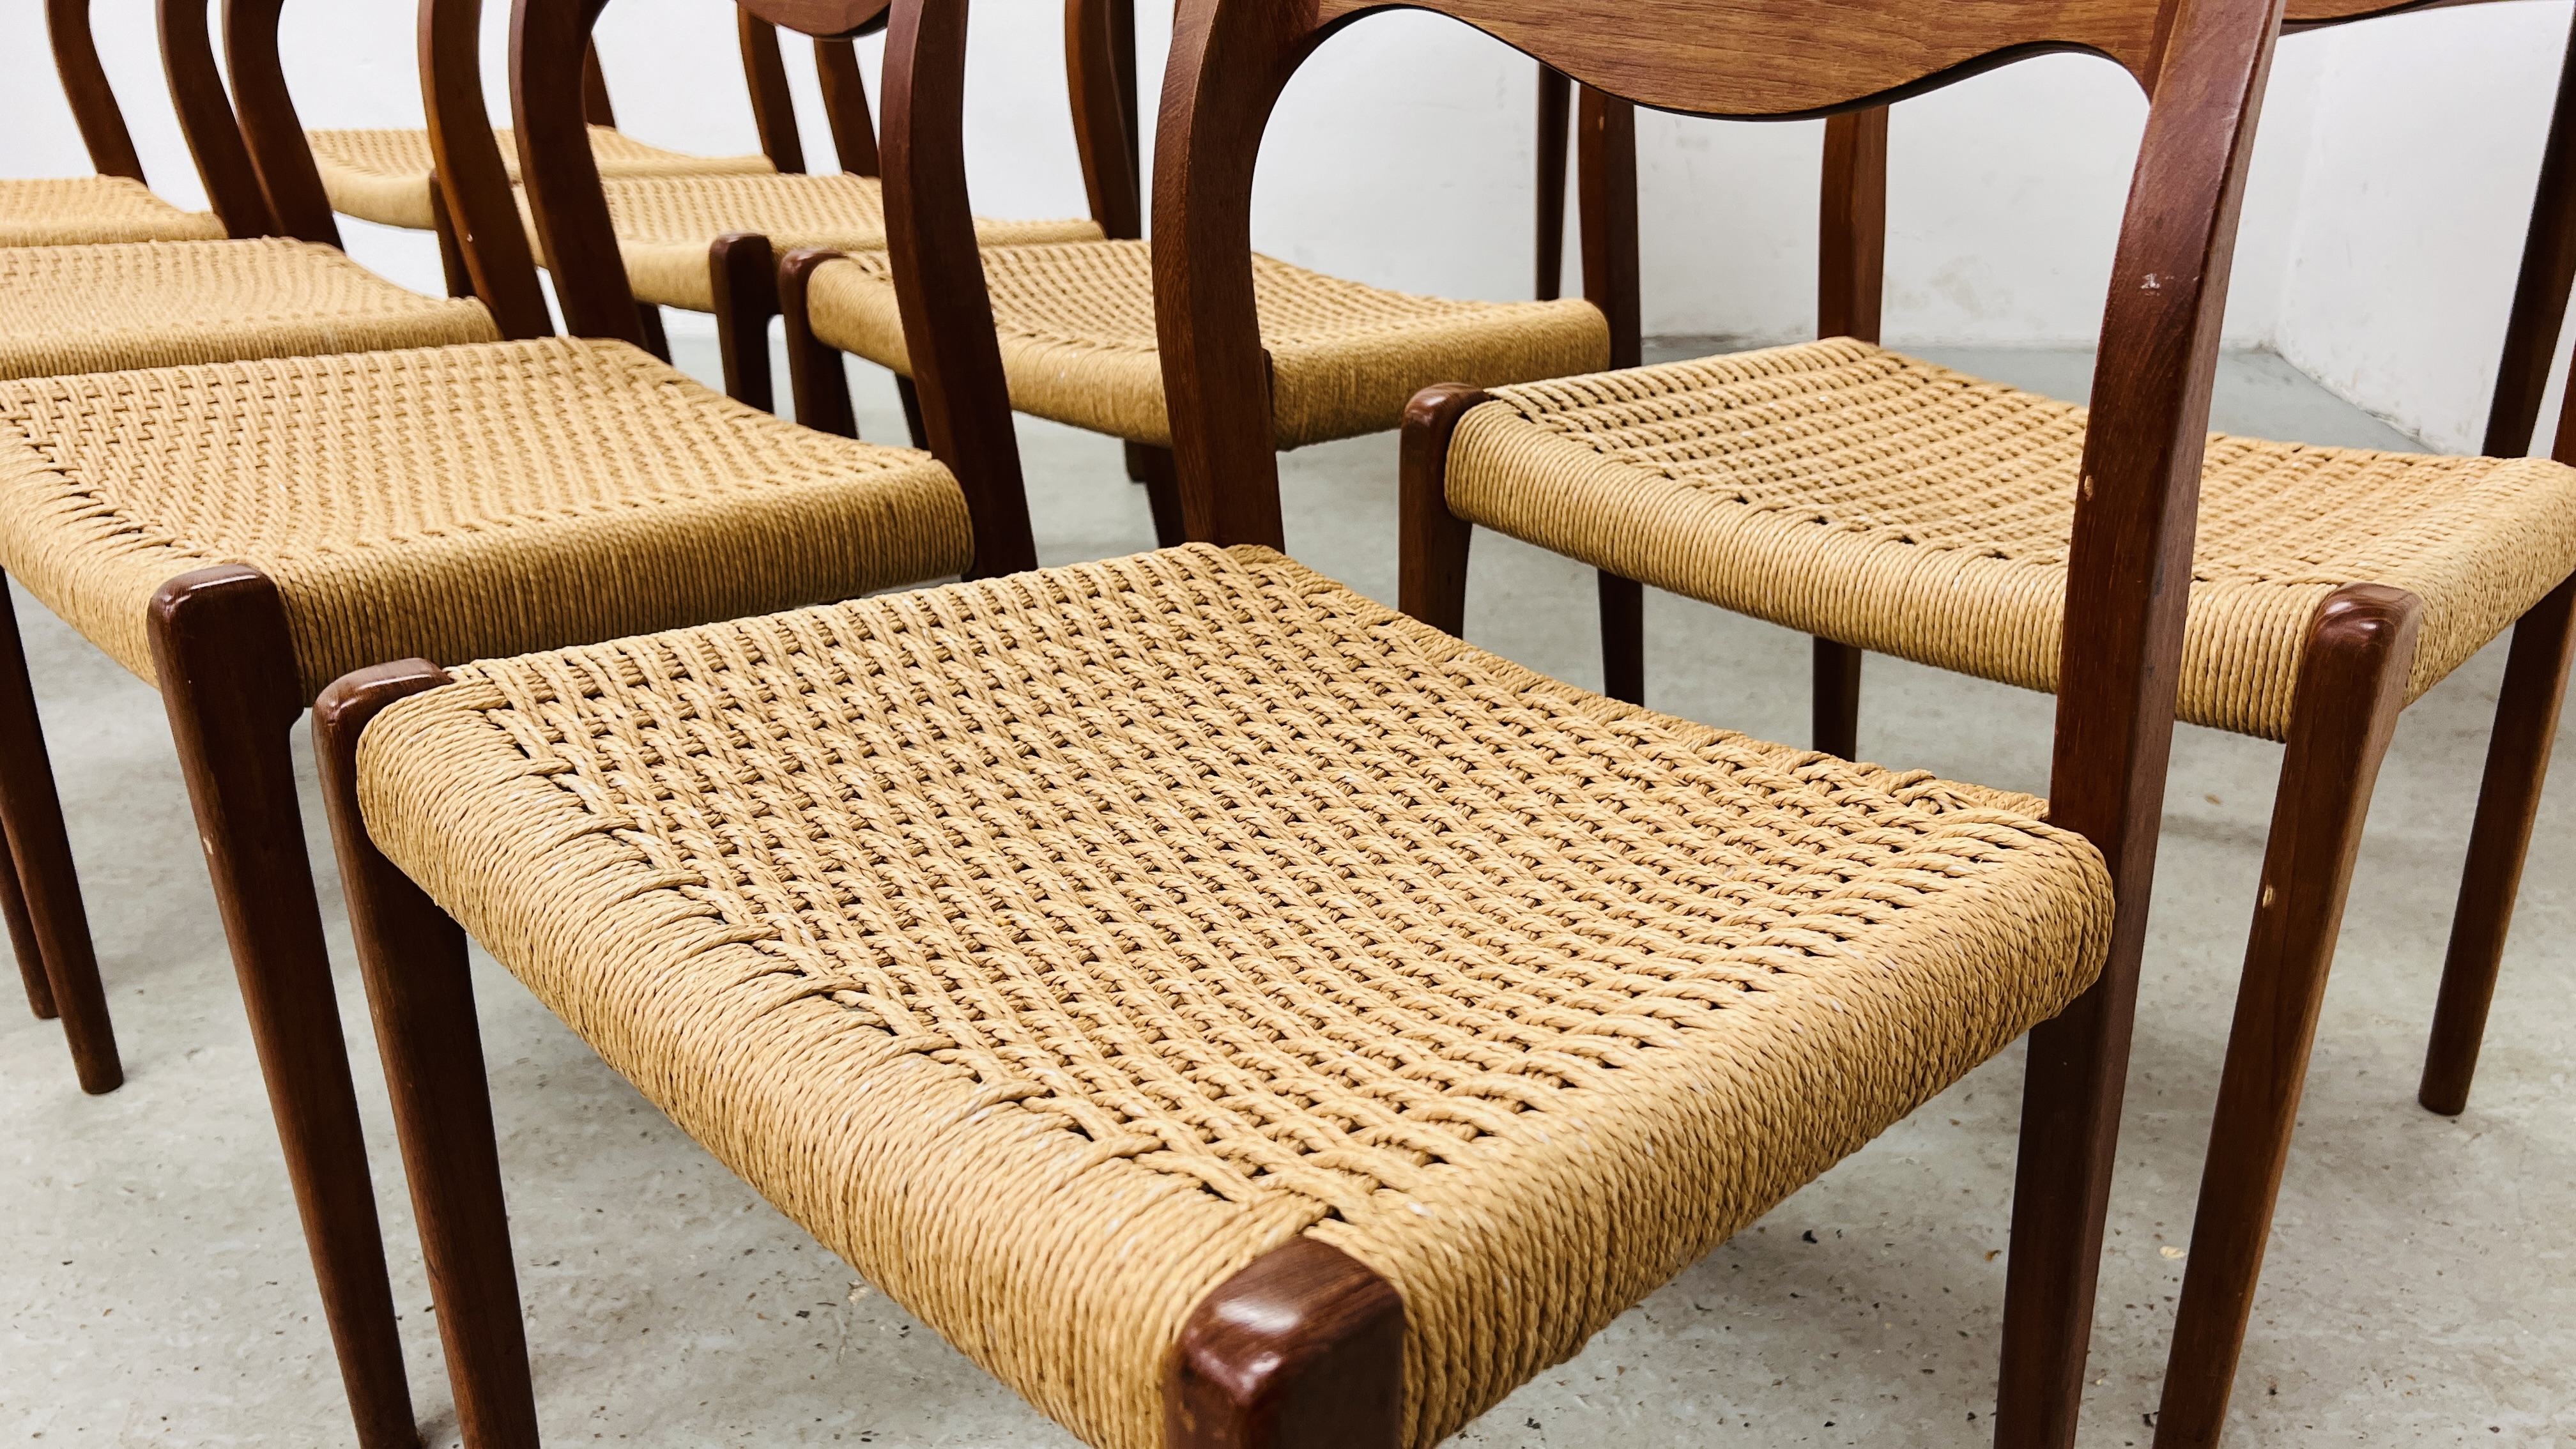 SET OF EIGHT J MOLLER DANISH TEAK DINING CHAIRS WITH WOVEN SISAL SEATS ALONG WITH A DRAWER LEAF - Image 6 of 48